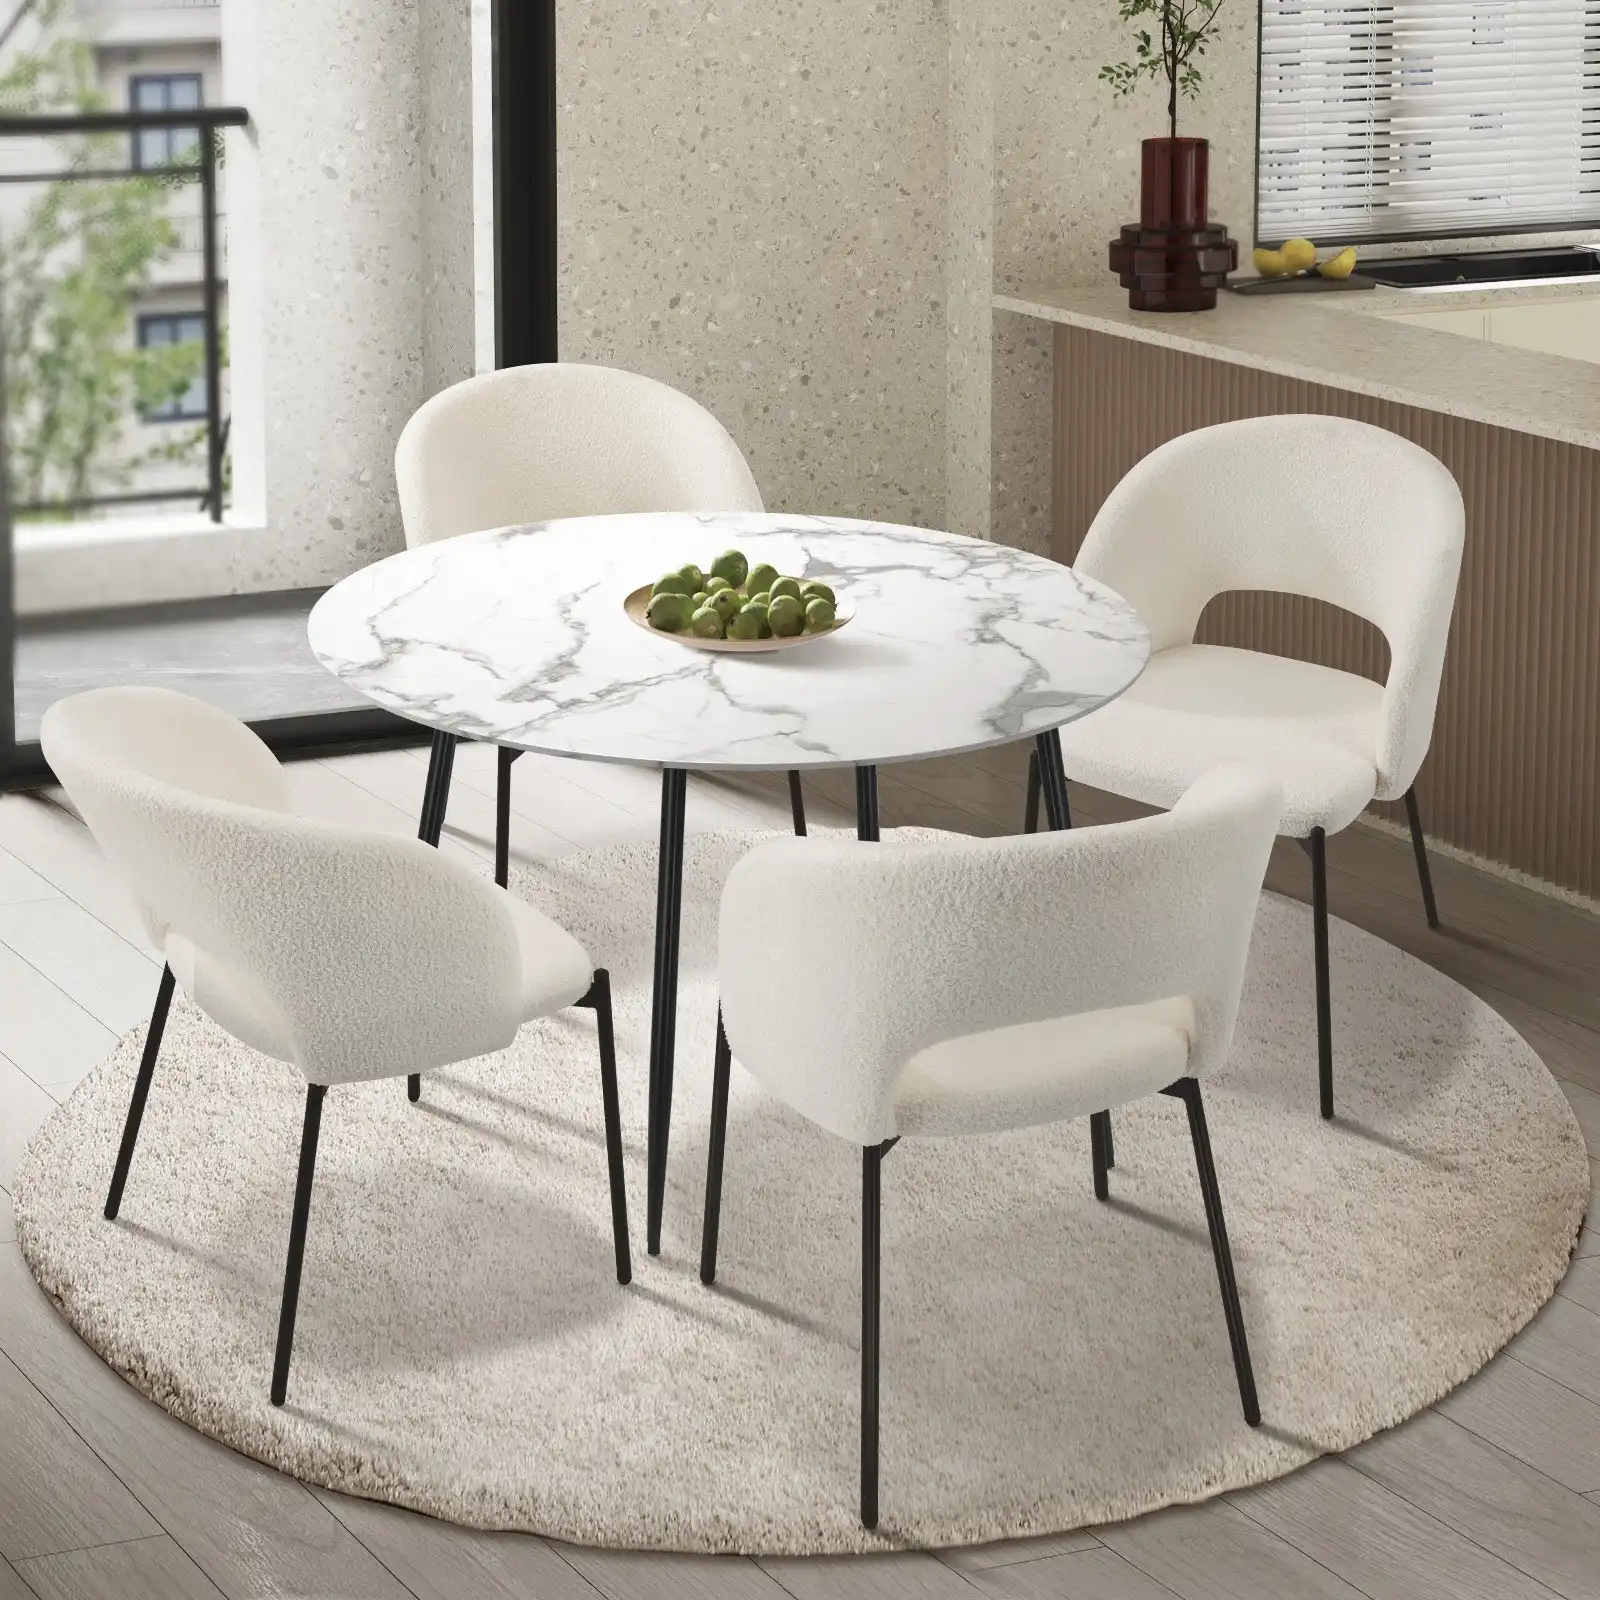 Oikiture 5PCS Dining sets 110cm Round Table with 4PCS Chairs Sherpa White